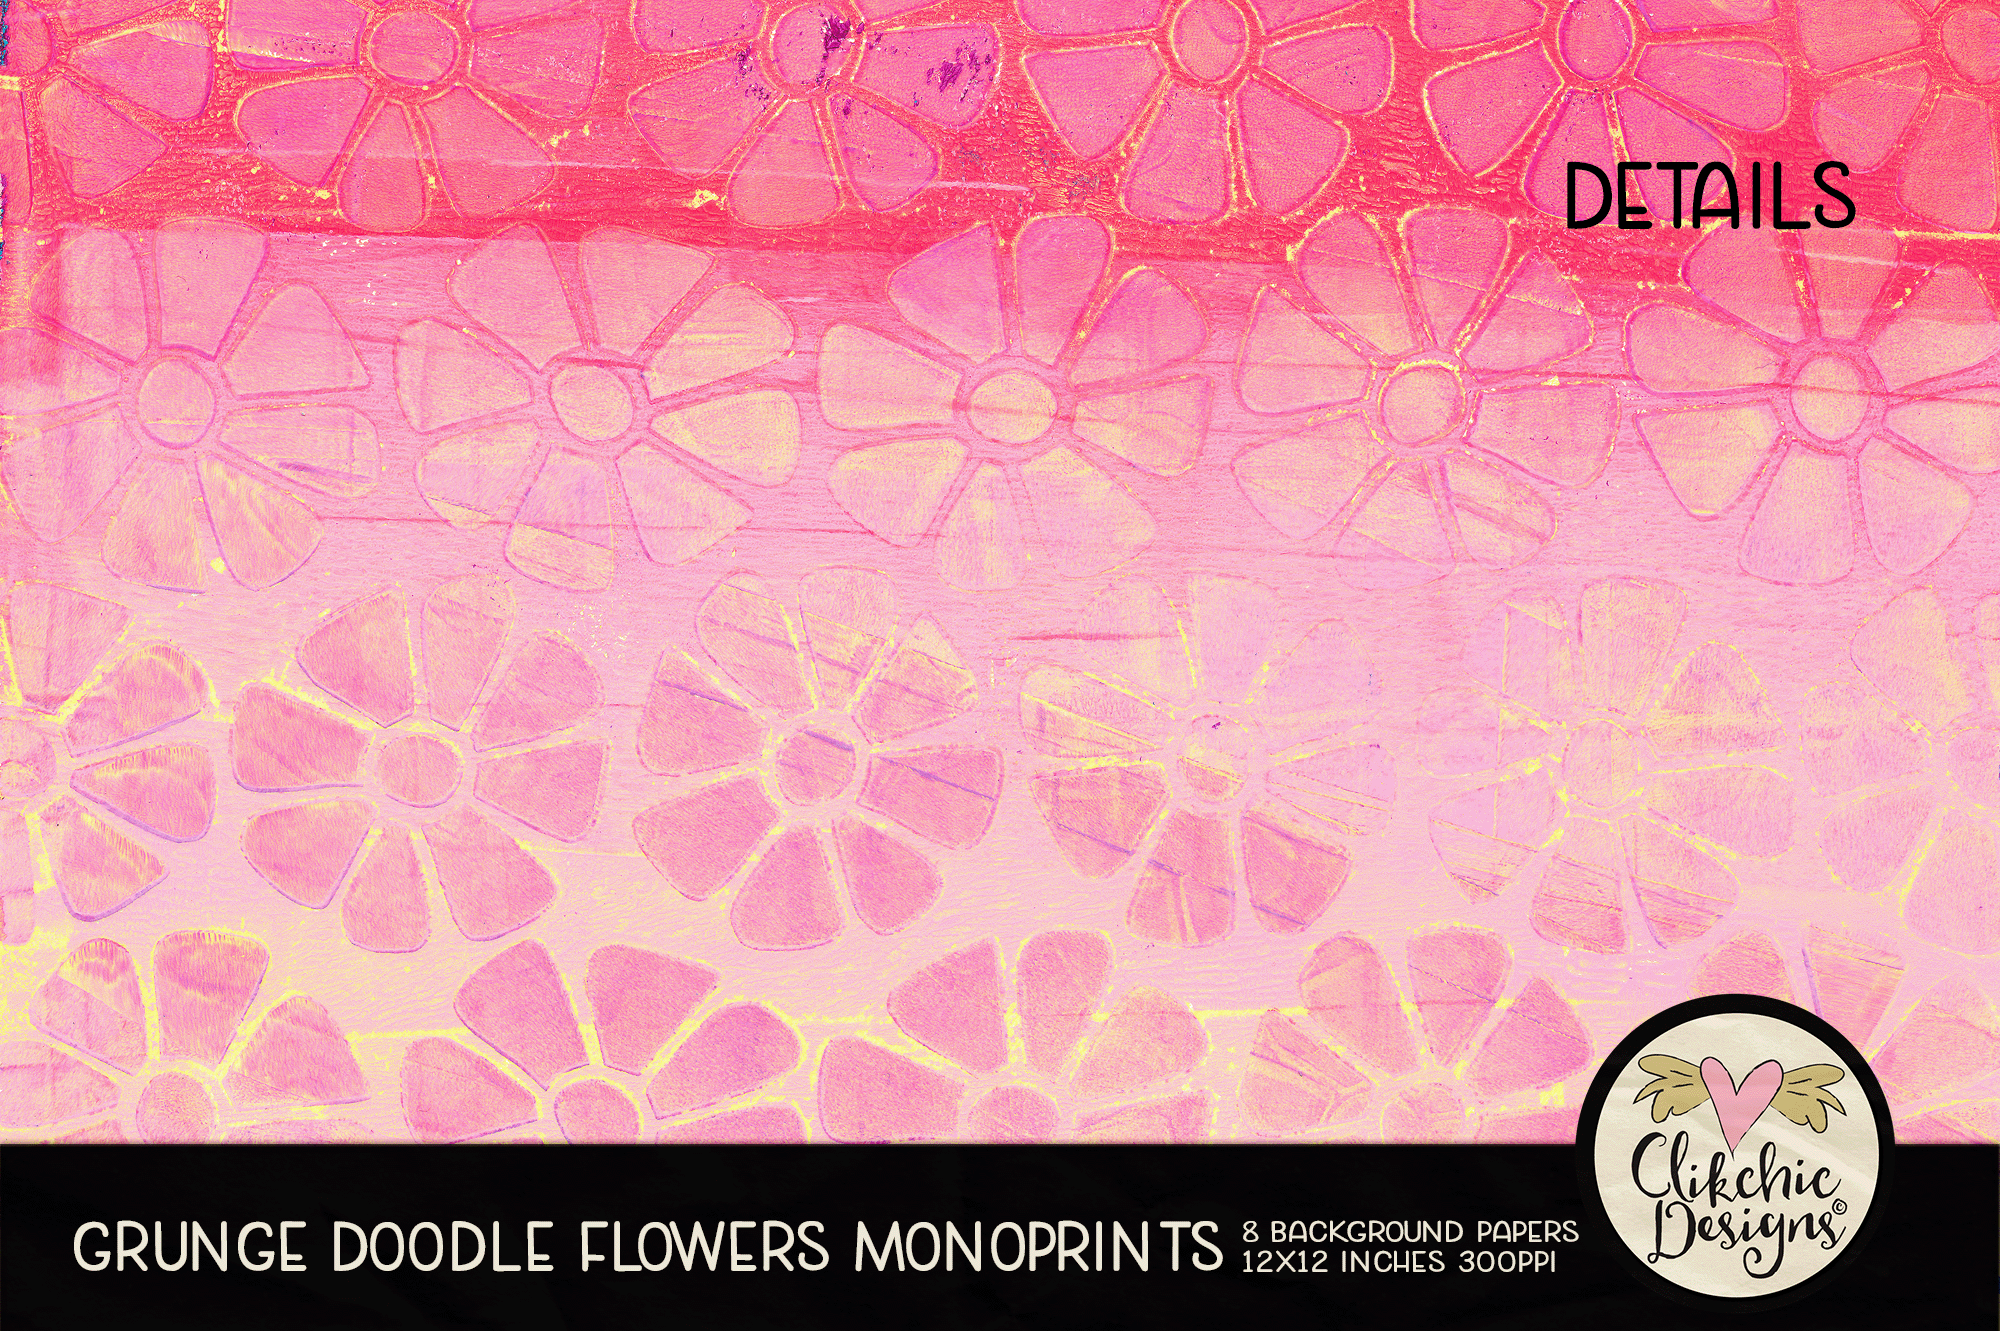 Doodle Flowers Grunge Monoprint Background Papers